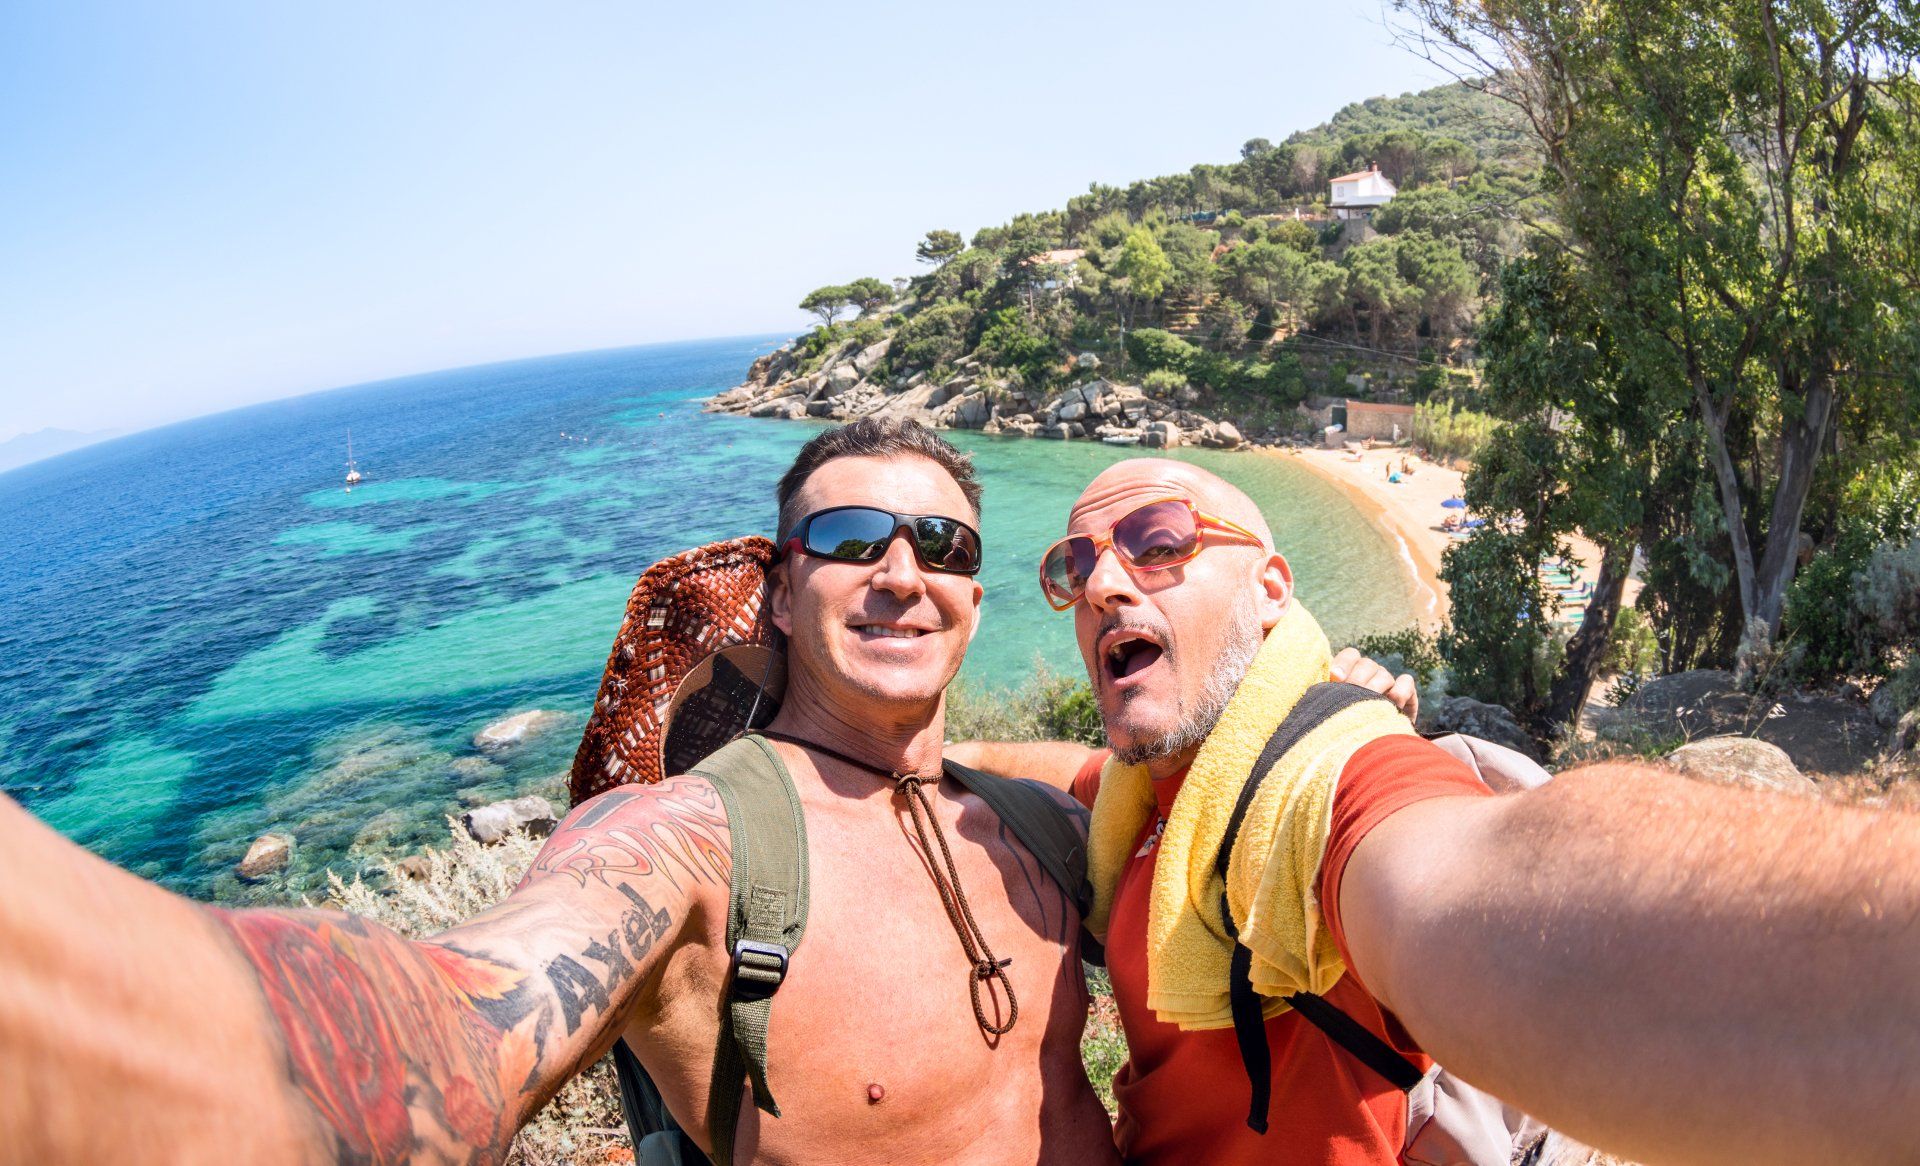 Two men are taking a selfie on a beach.